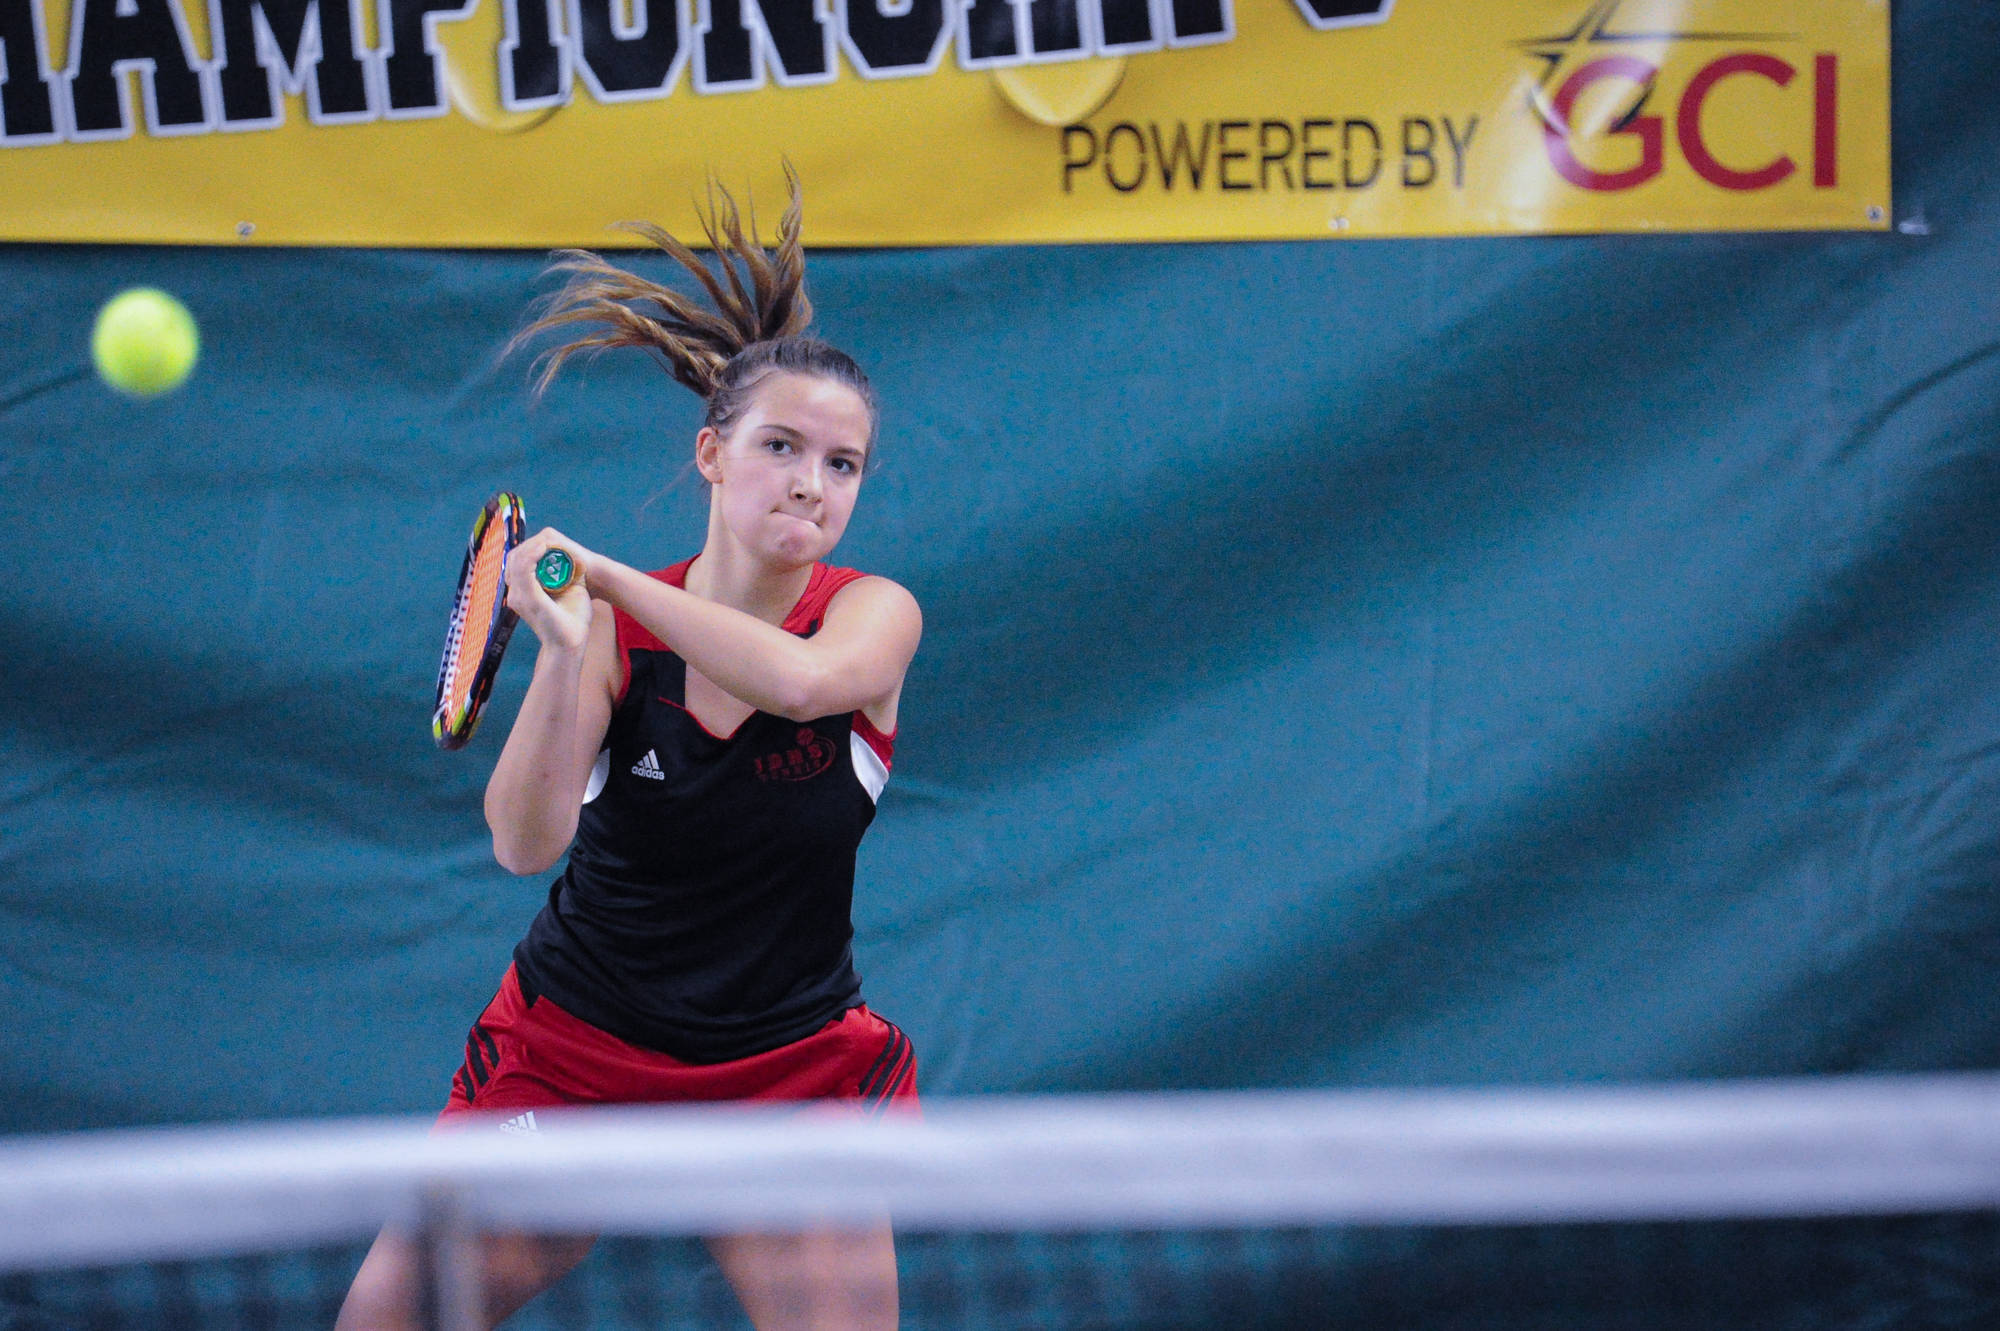 Erica Hurtte makes a return against South Anchorage’s Christine Hemry in the singles state championship game of the ASAA/First National Bank Alaska State Tennis Championships at the Alaska Club East in Anchorage on Saturday, Oct. 6, 2018. Hurtte lost 6-1, 6-1. (Michael Dinneen | For the Juneau Empire)